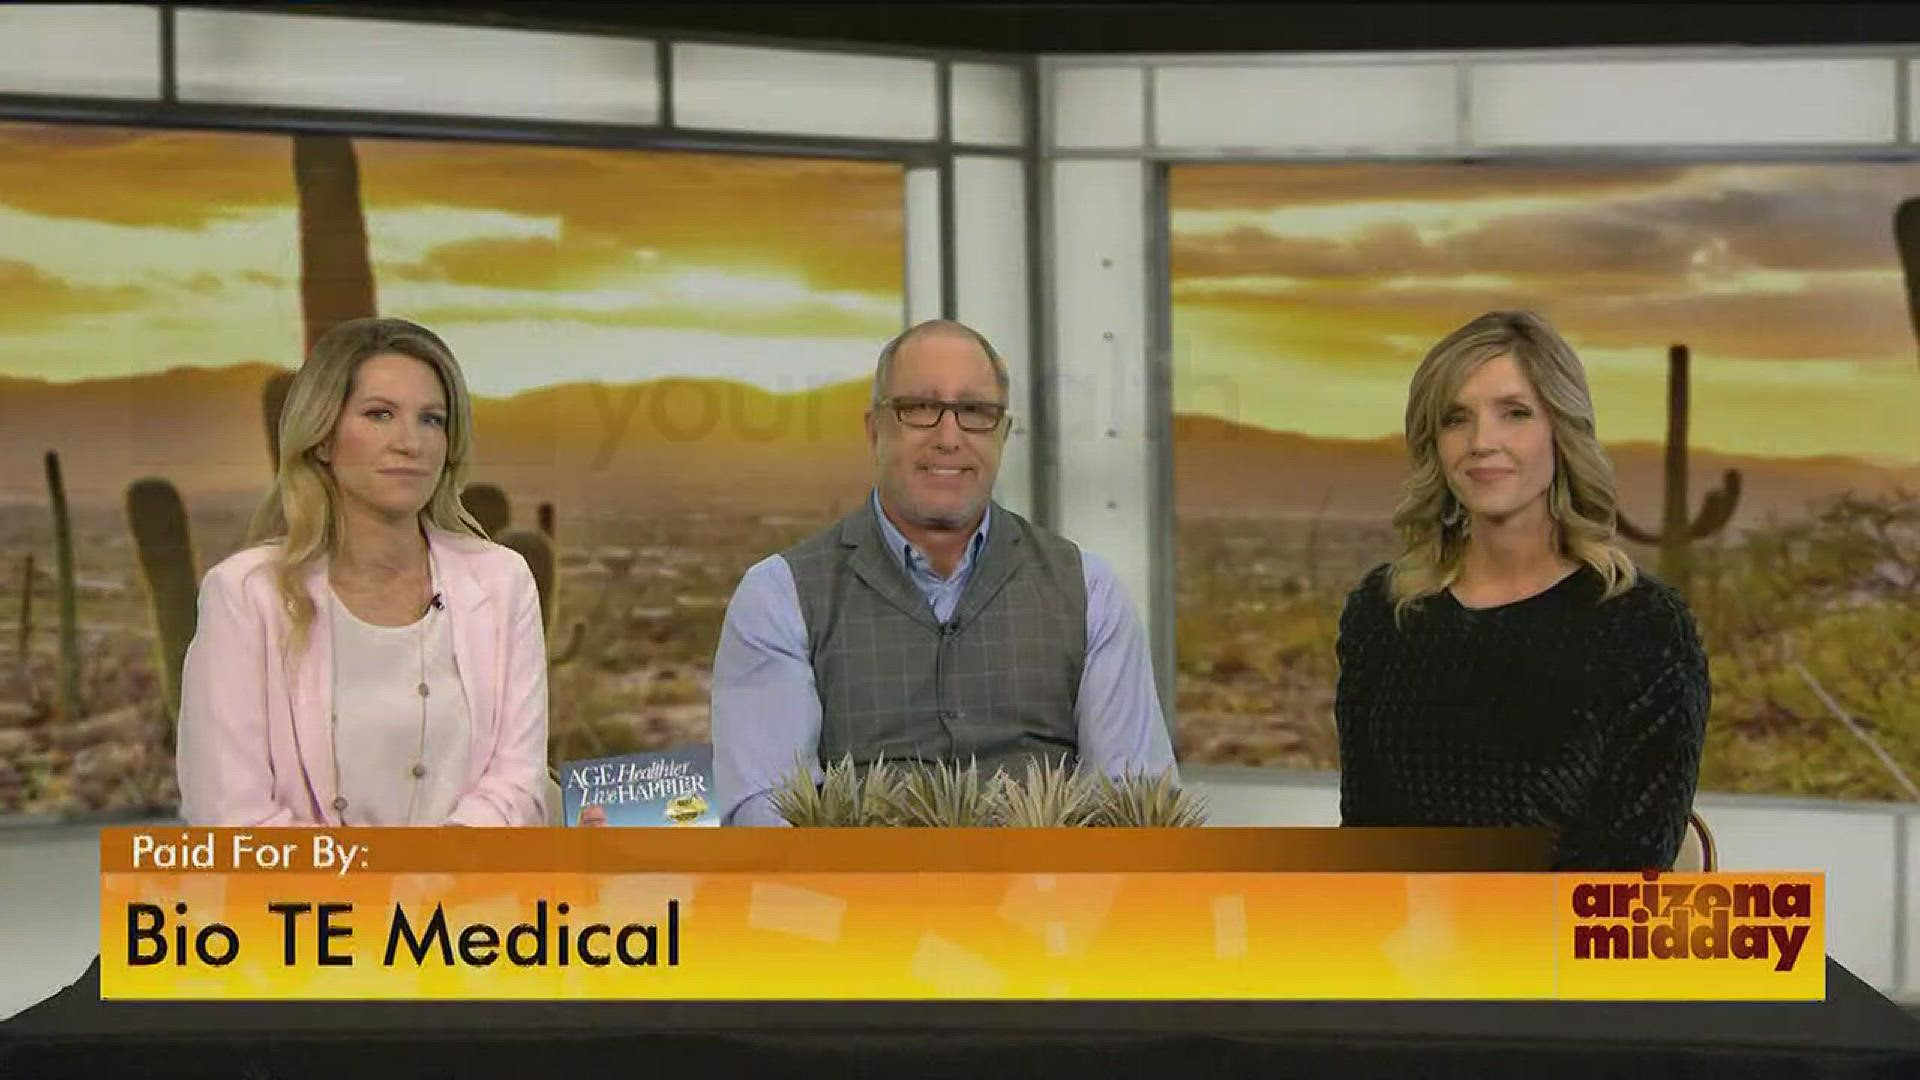 Dr Spice Lussier and Dr. Gary Donovitz discuss how Bio Te Medical can help get your hormones balanced to live a healthier and happier life.